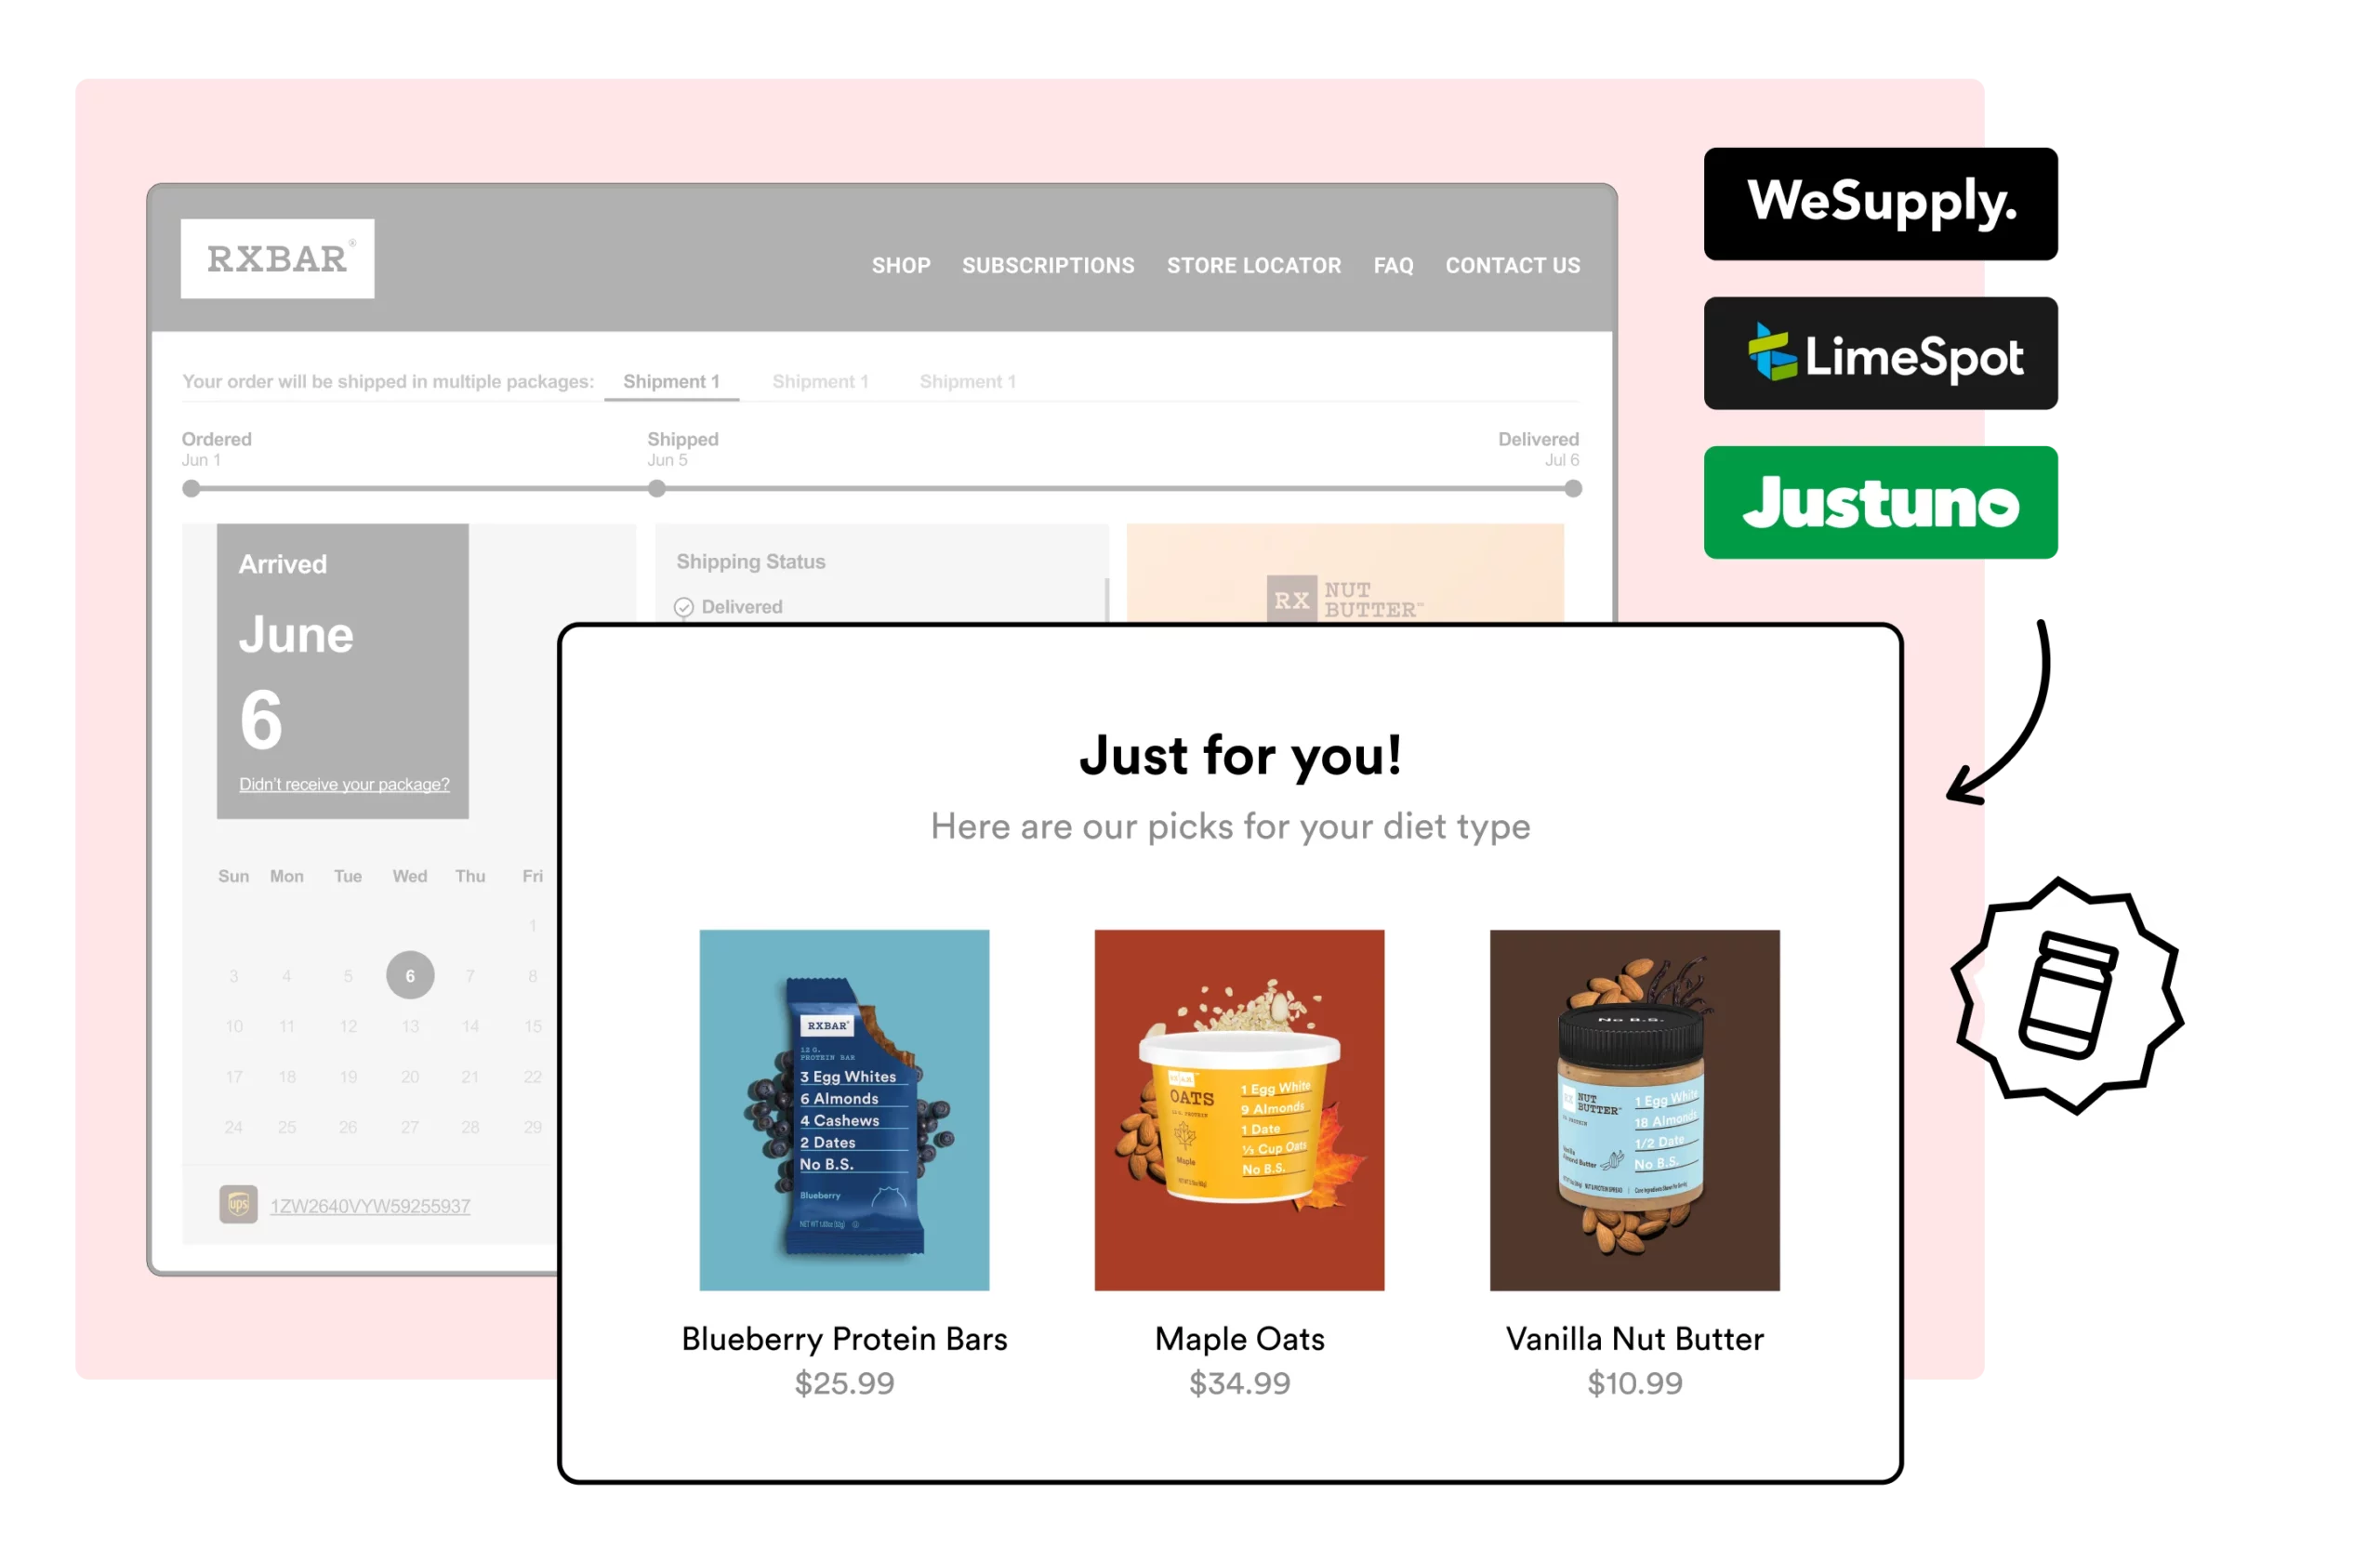 WeSupply Branded Tracking Page with Recommmended Products - rxbar